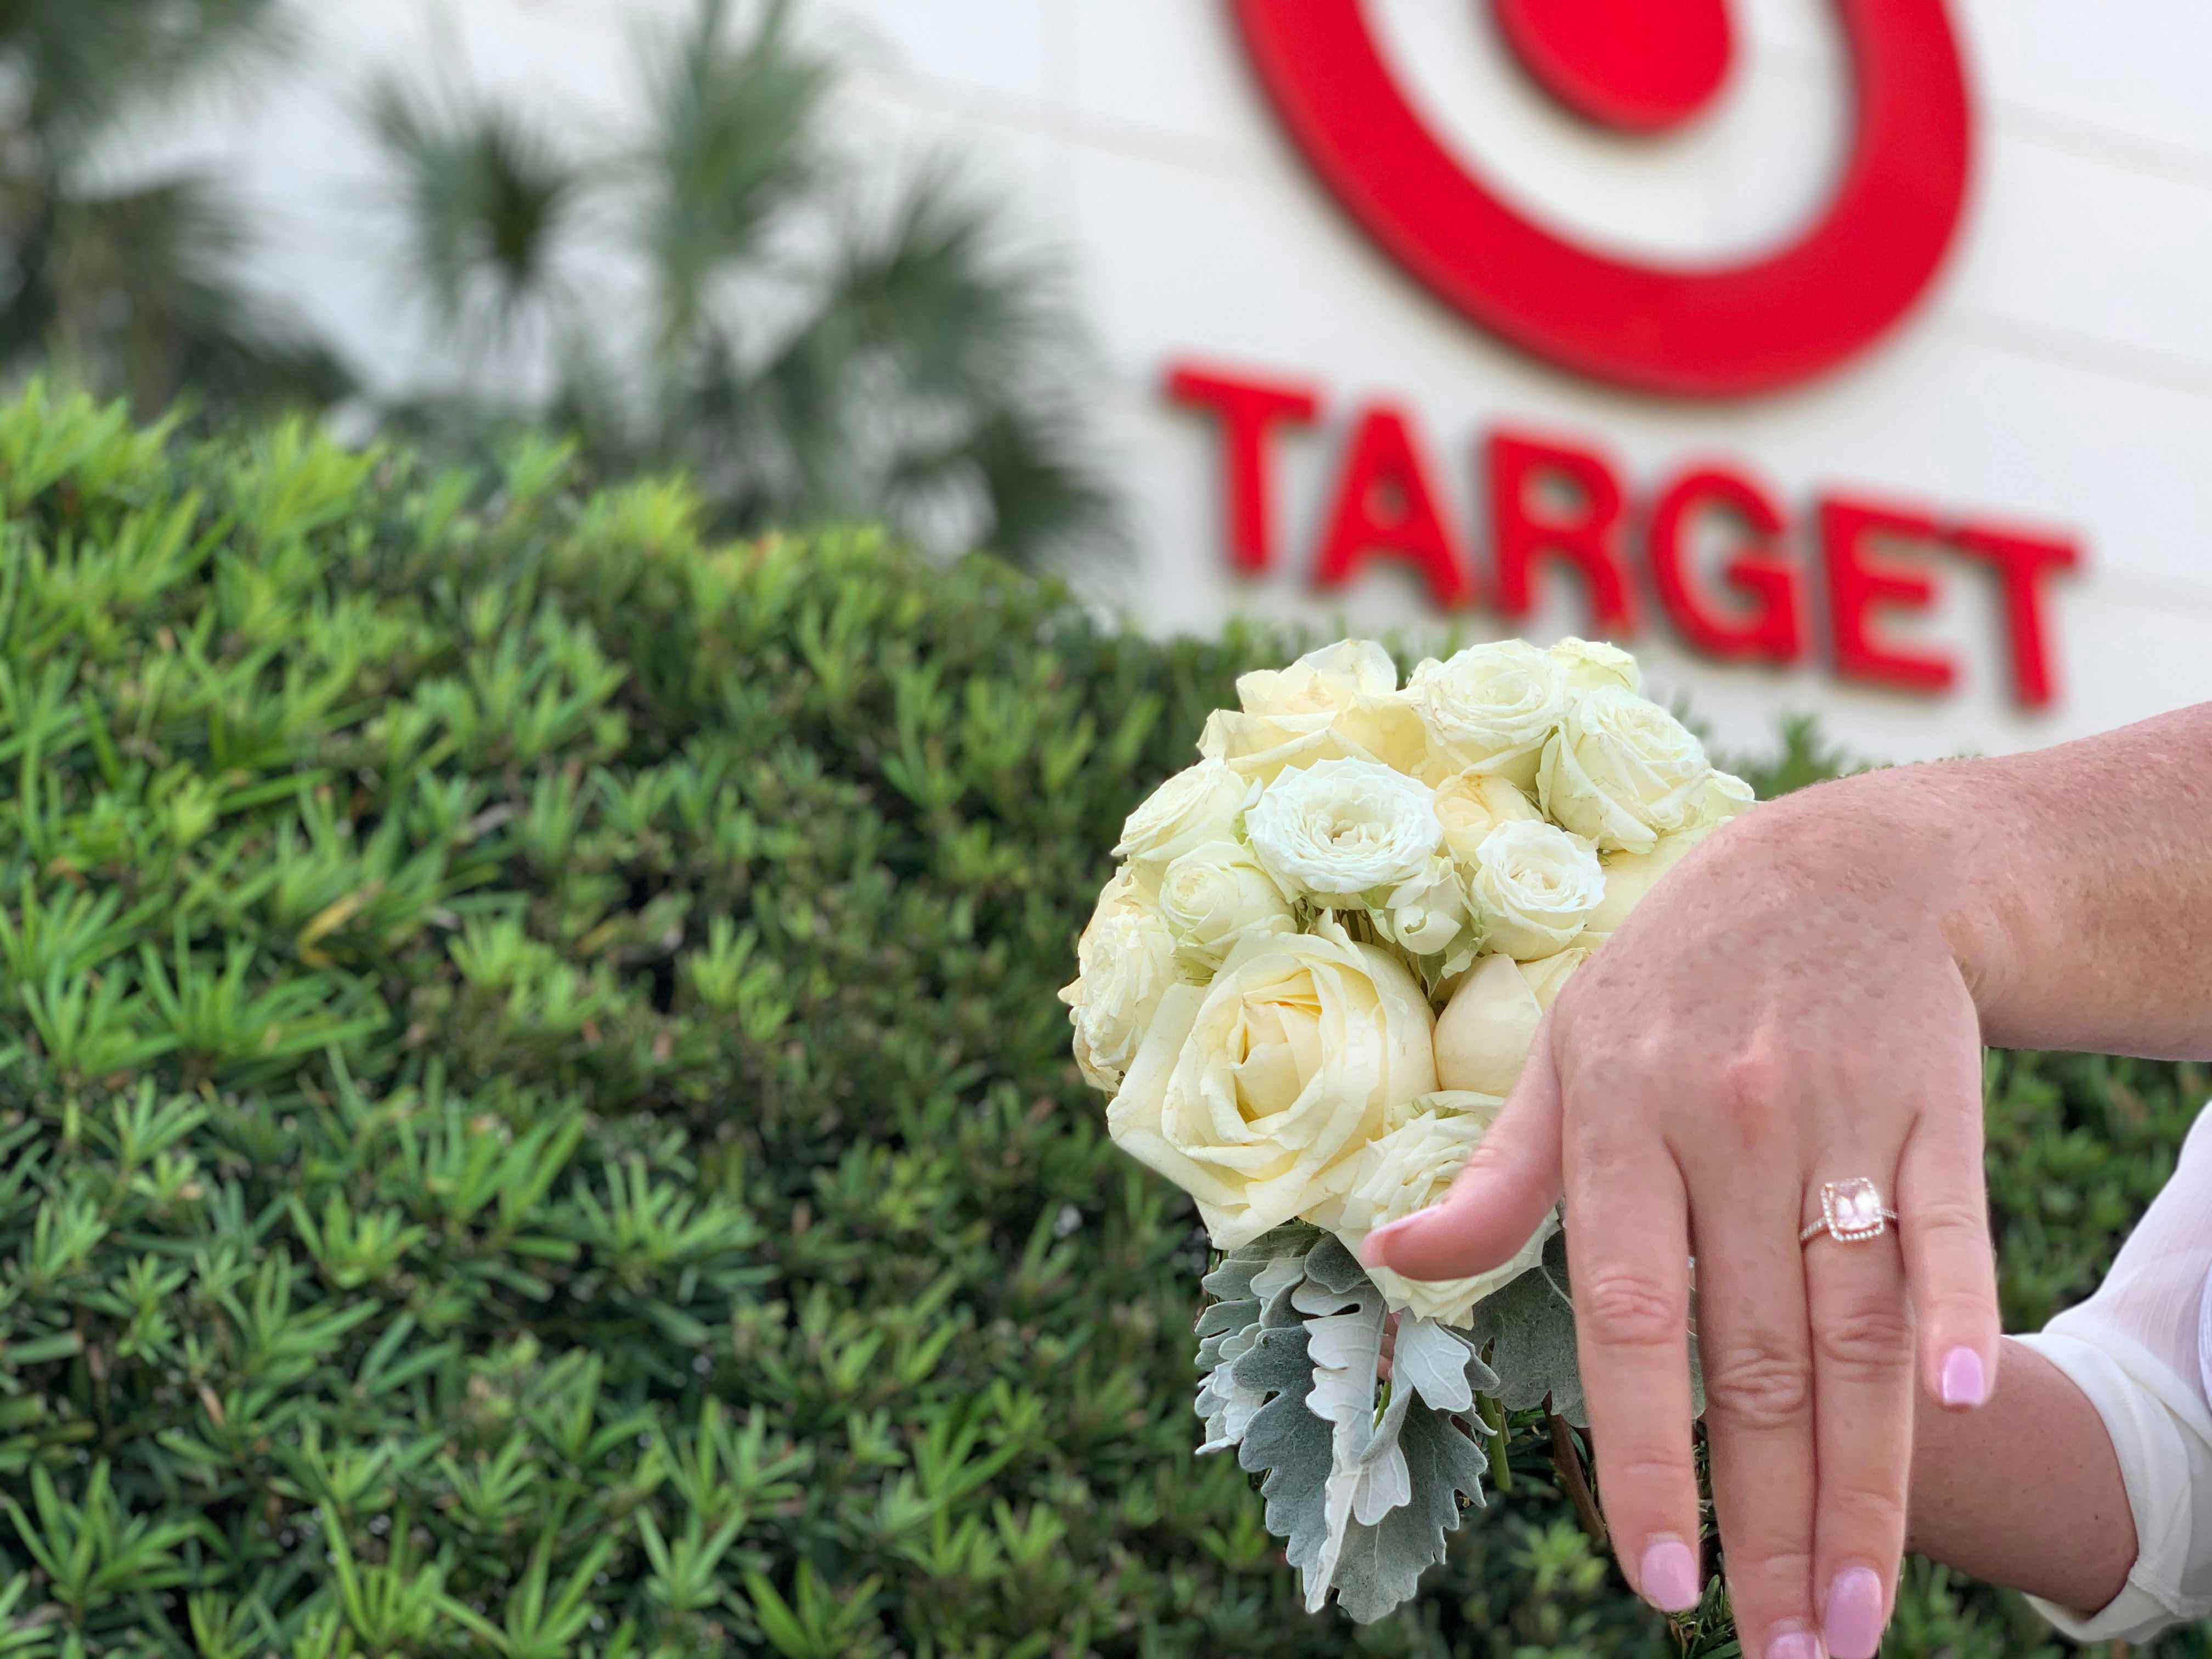 hand holding out wedding ring in front of white bridal bouquet in front of target store sign